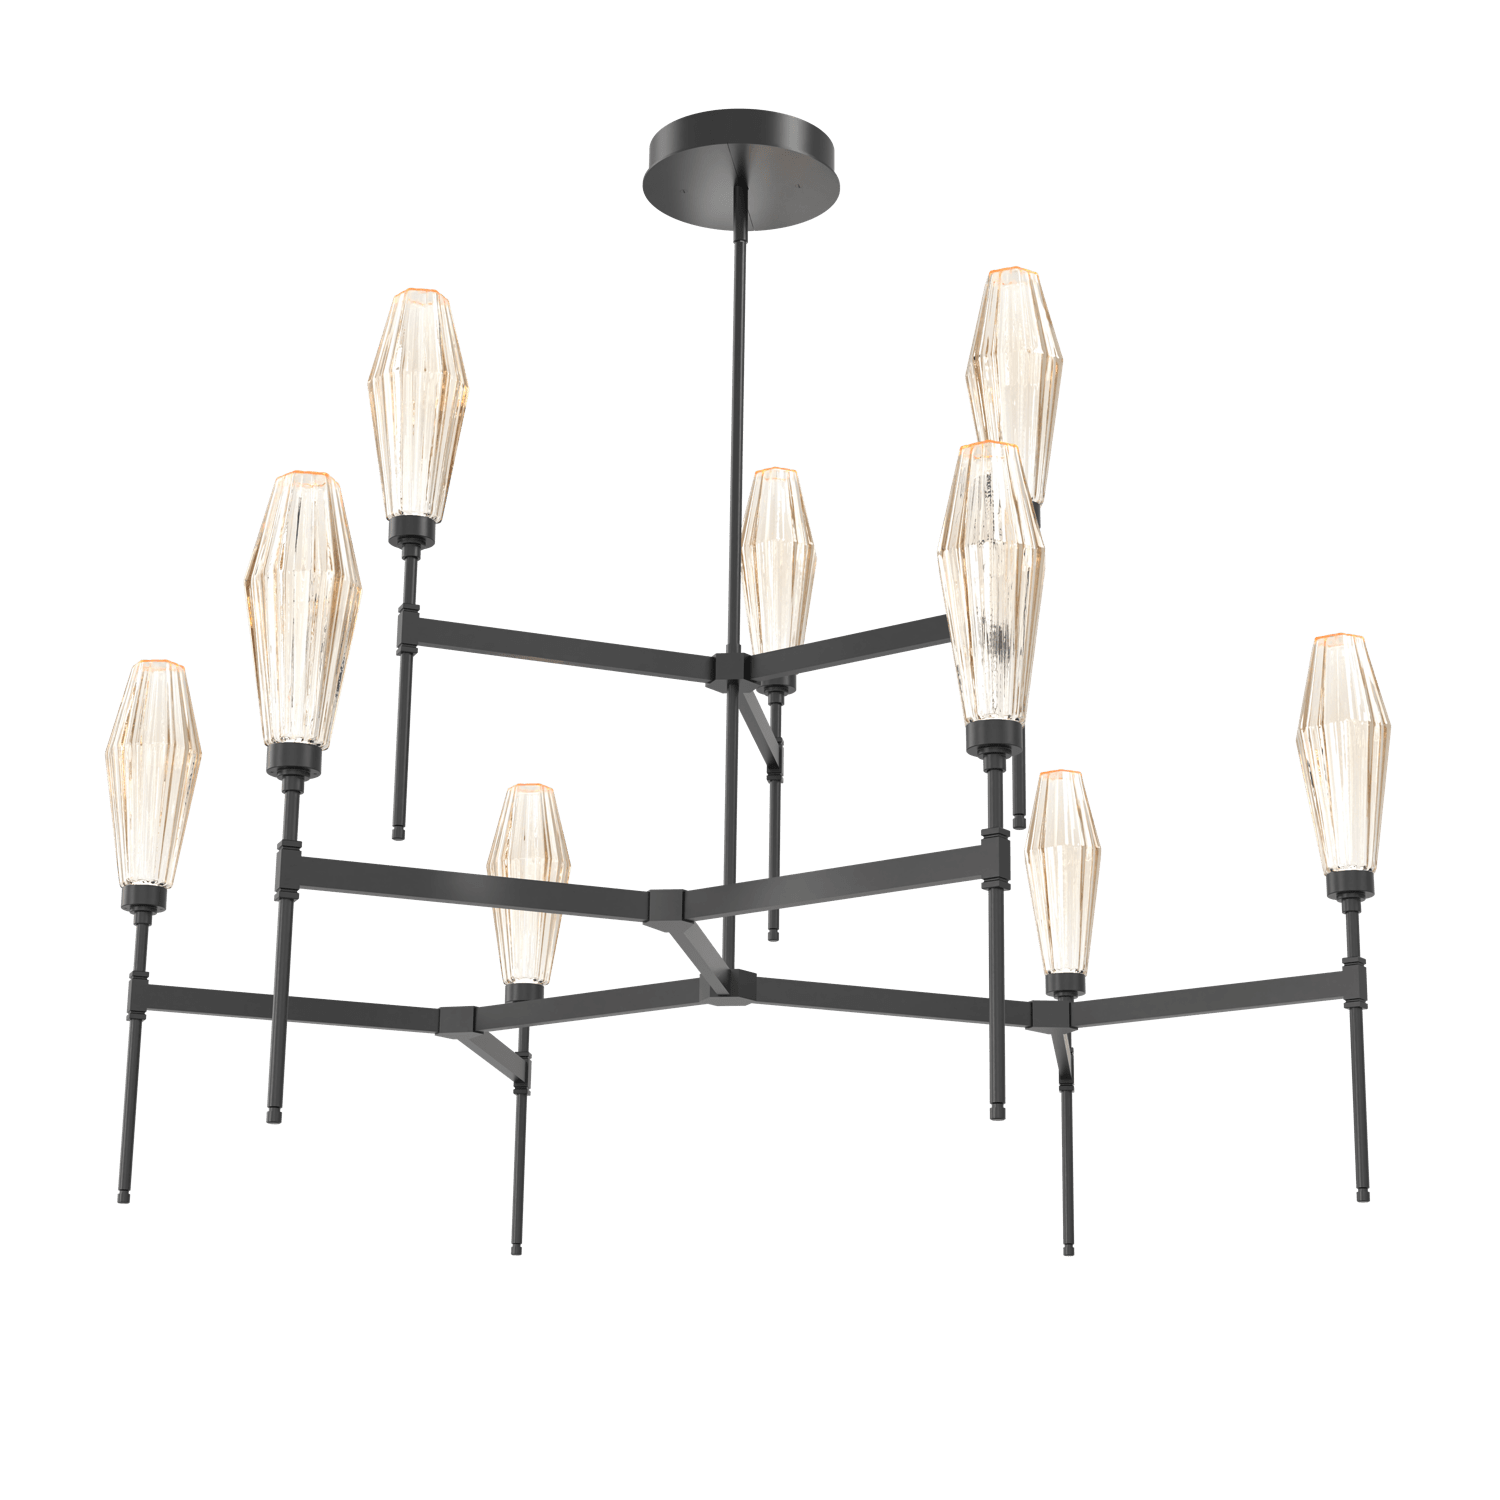 CHB0049-54-MB-RA-Hammerton-Studio-Aalto-54-inch-round-two-tier-belvedere-chandelier-with-matte-black-finish-and-optic-ribbed-amber-glass-shades-and-LED-lamping